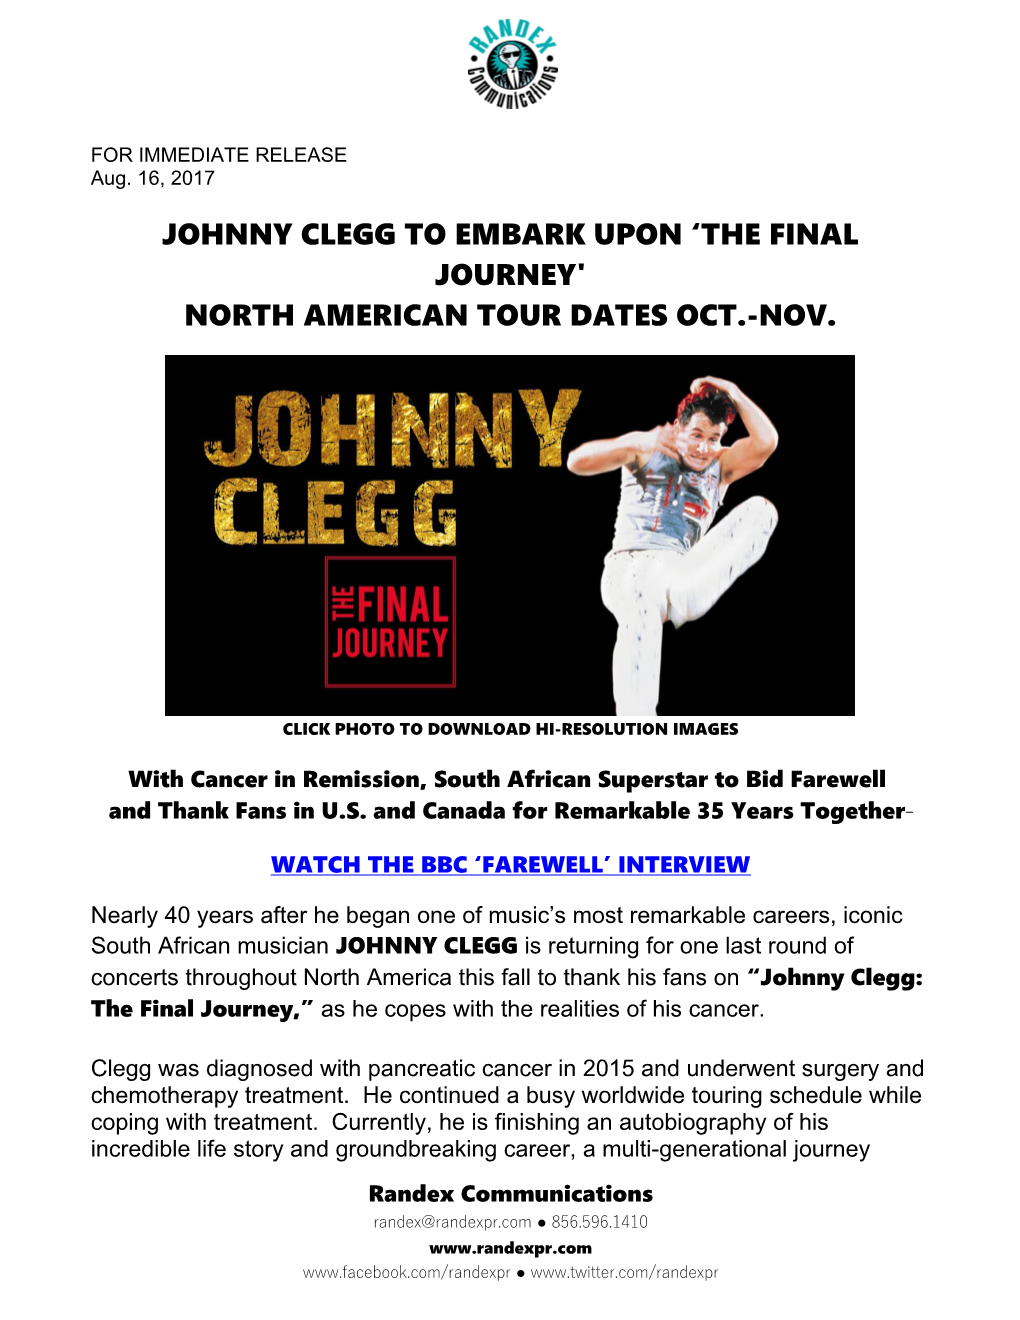 Johnny Clegg to Embark Upon the Final Journey'